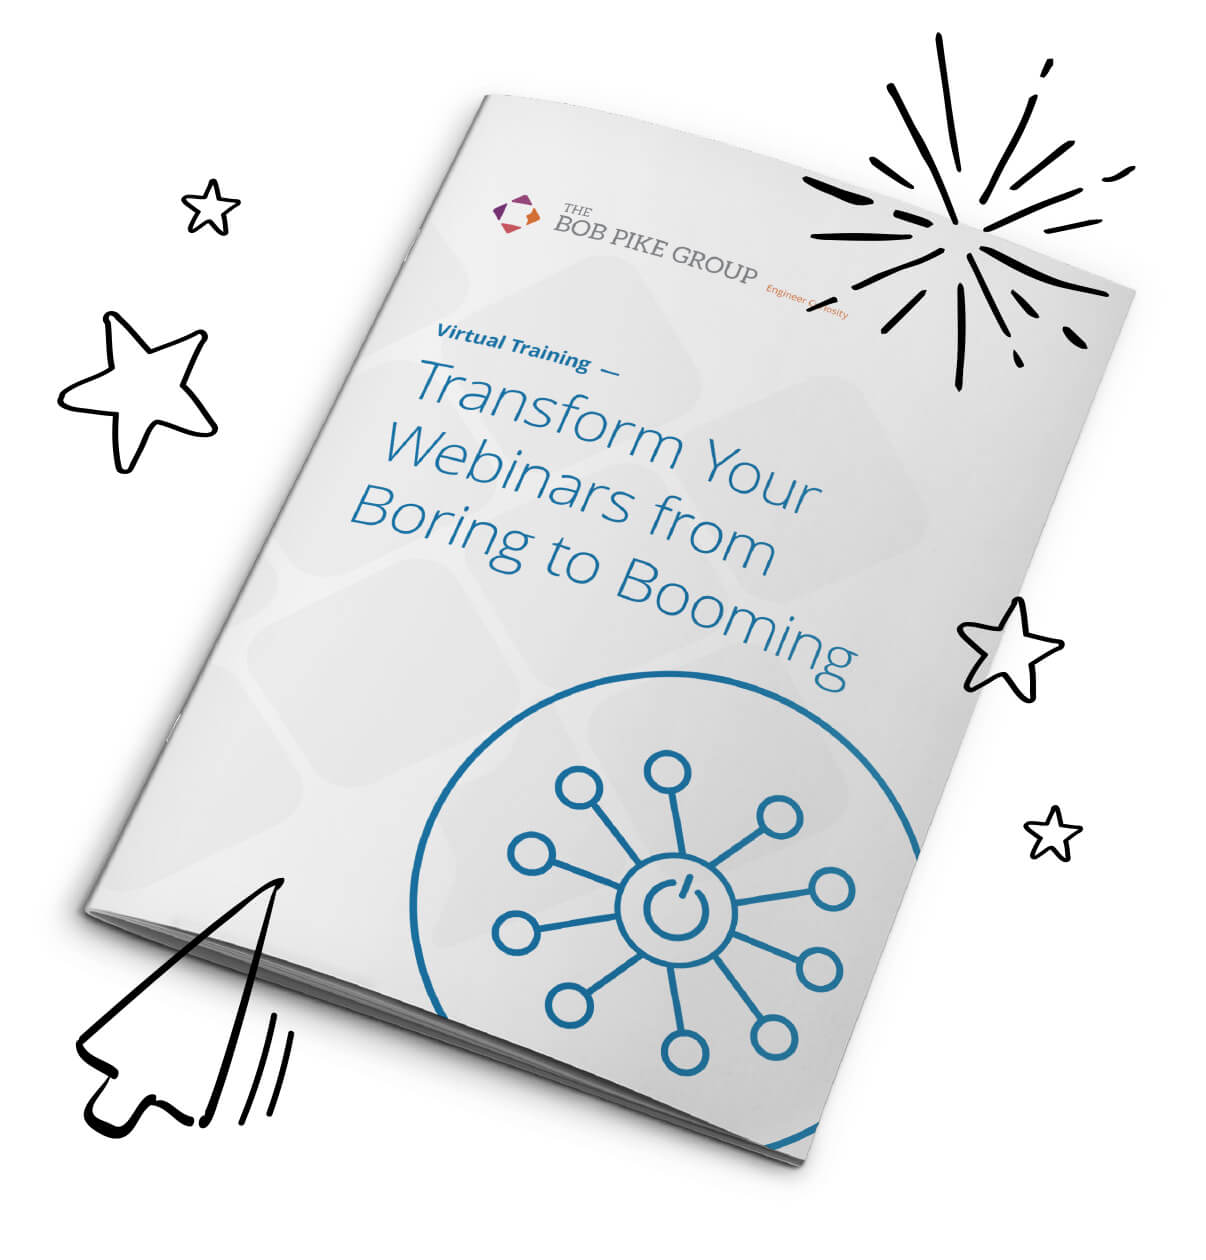 FREE Resource Guide: Transform Your Webinars from Boring to Booming